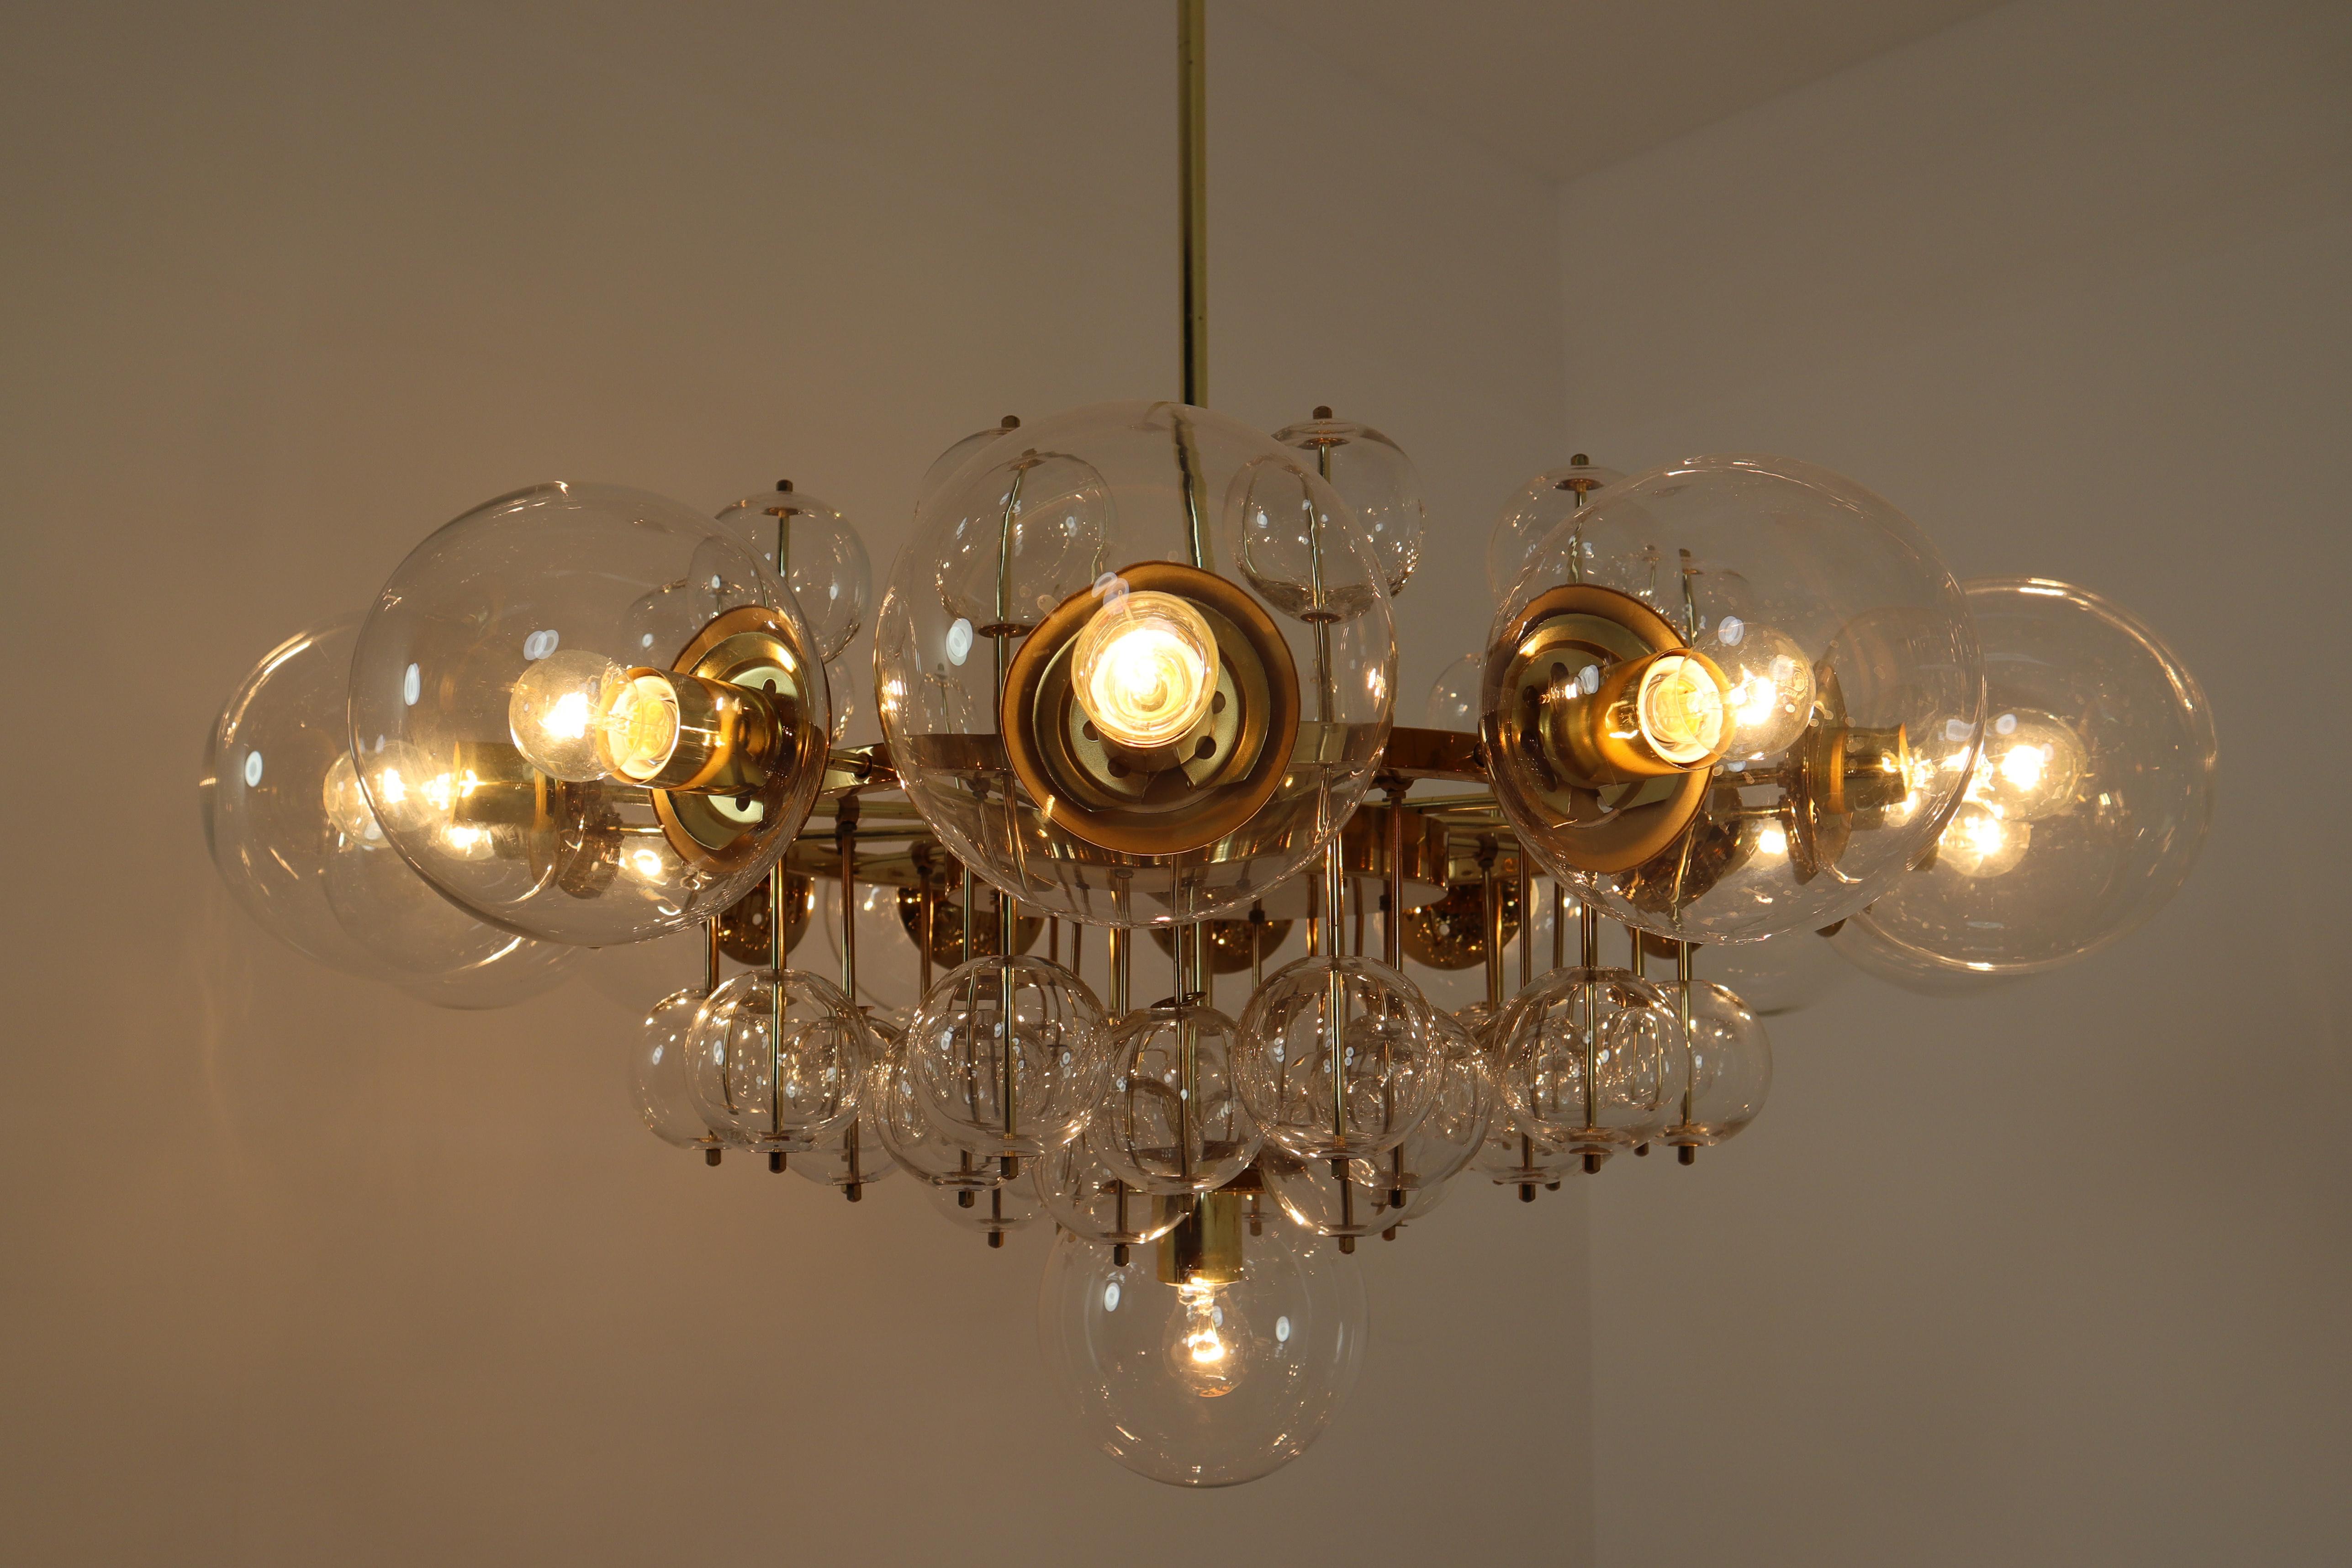 Mid-Century Modern Midcentury Hotel Chandelier with Brass Fixture and Hand-Blowed Glass Globes